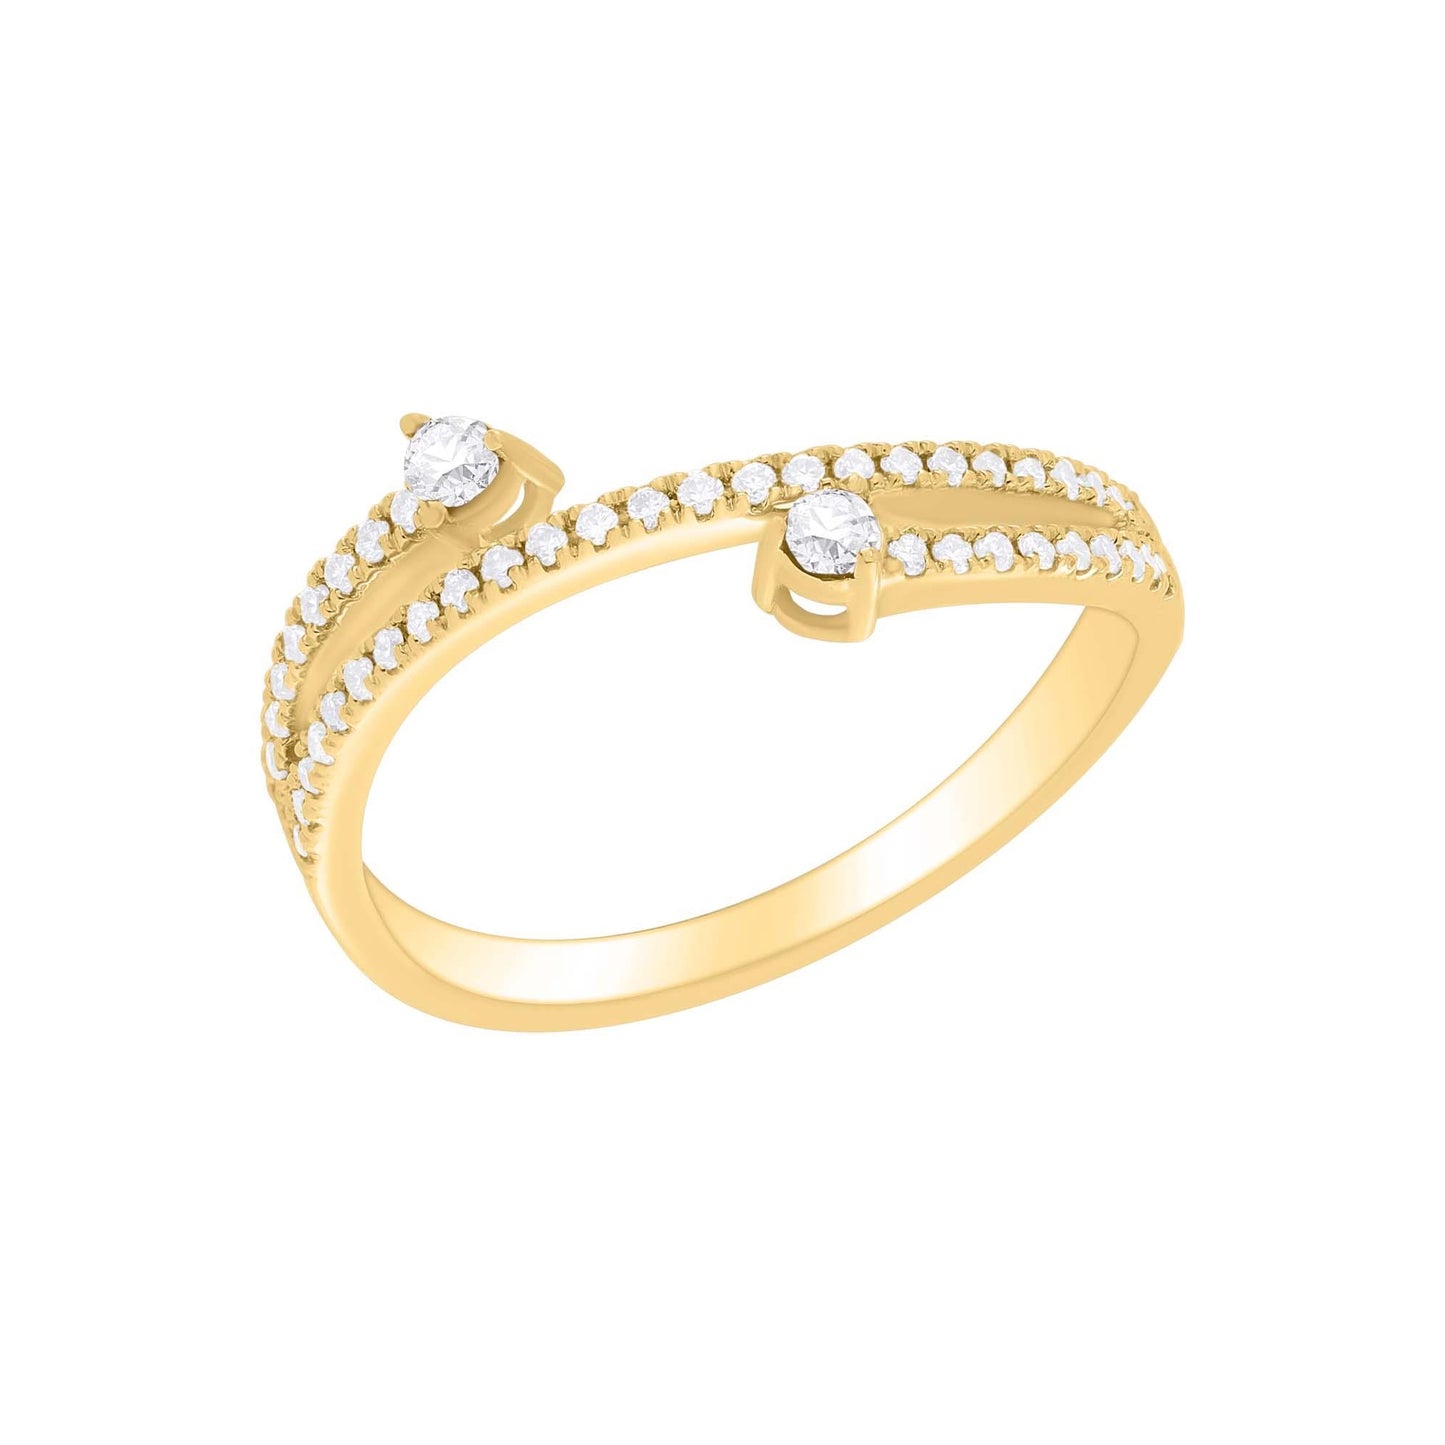 YOU AND ME Diamond Ring 14K Gold